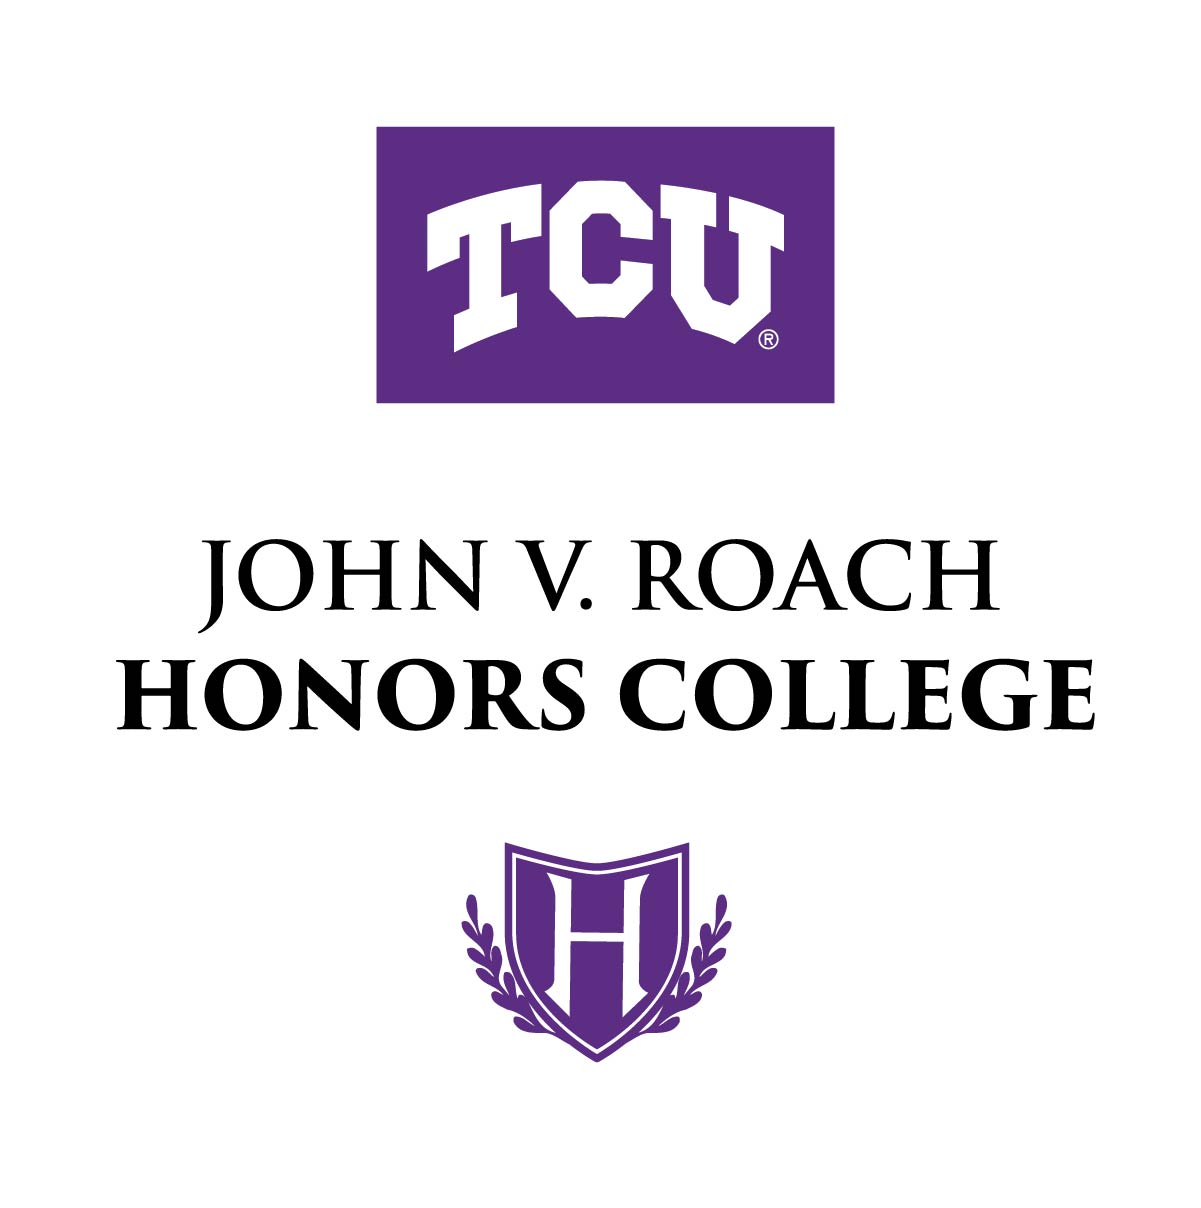 The John V. Roach Honors College presents Dr. Omid Tofighian